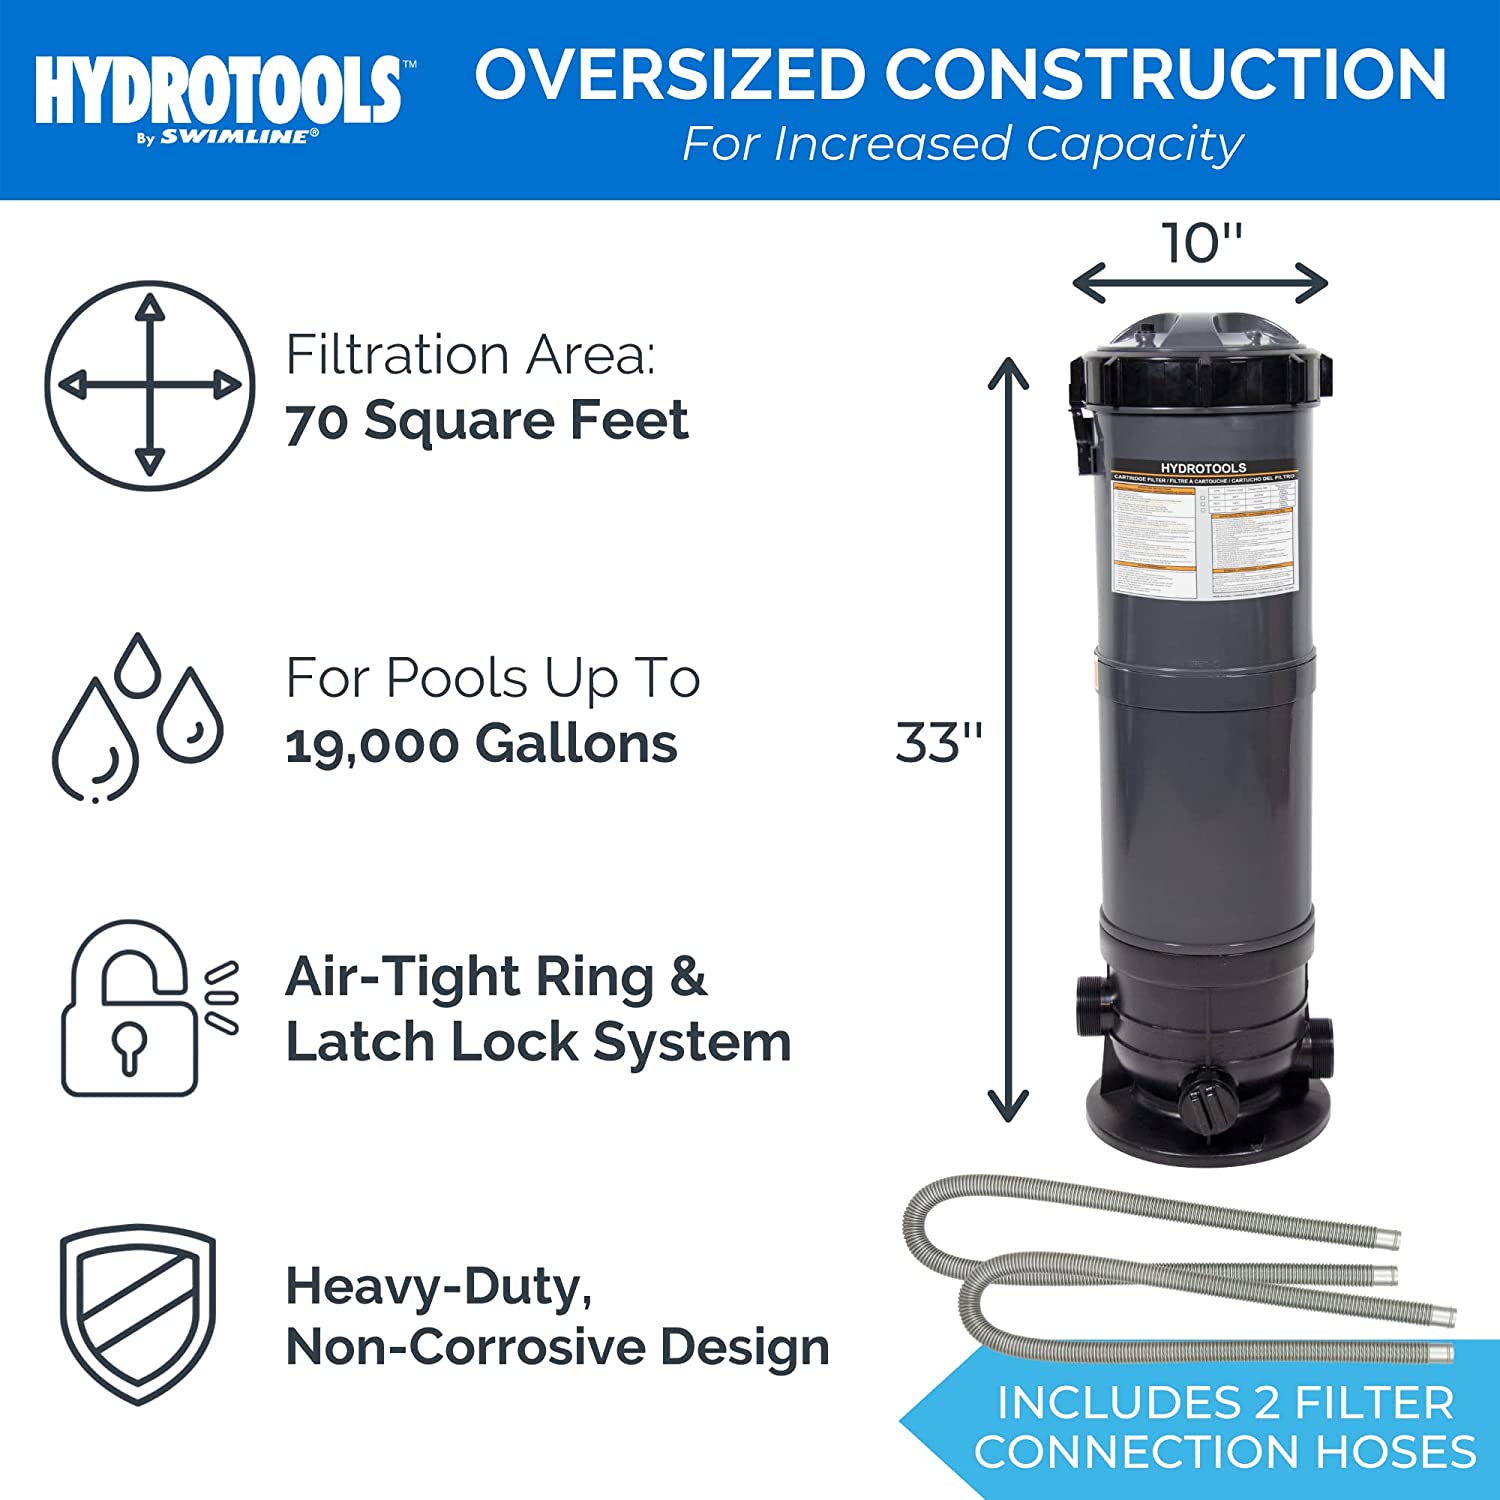 Model 76071 SURE-FLO 70 SQ FT Cartridge Filter System with 0.9 THP Pump